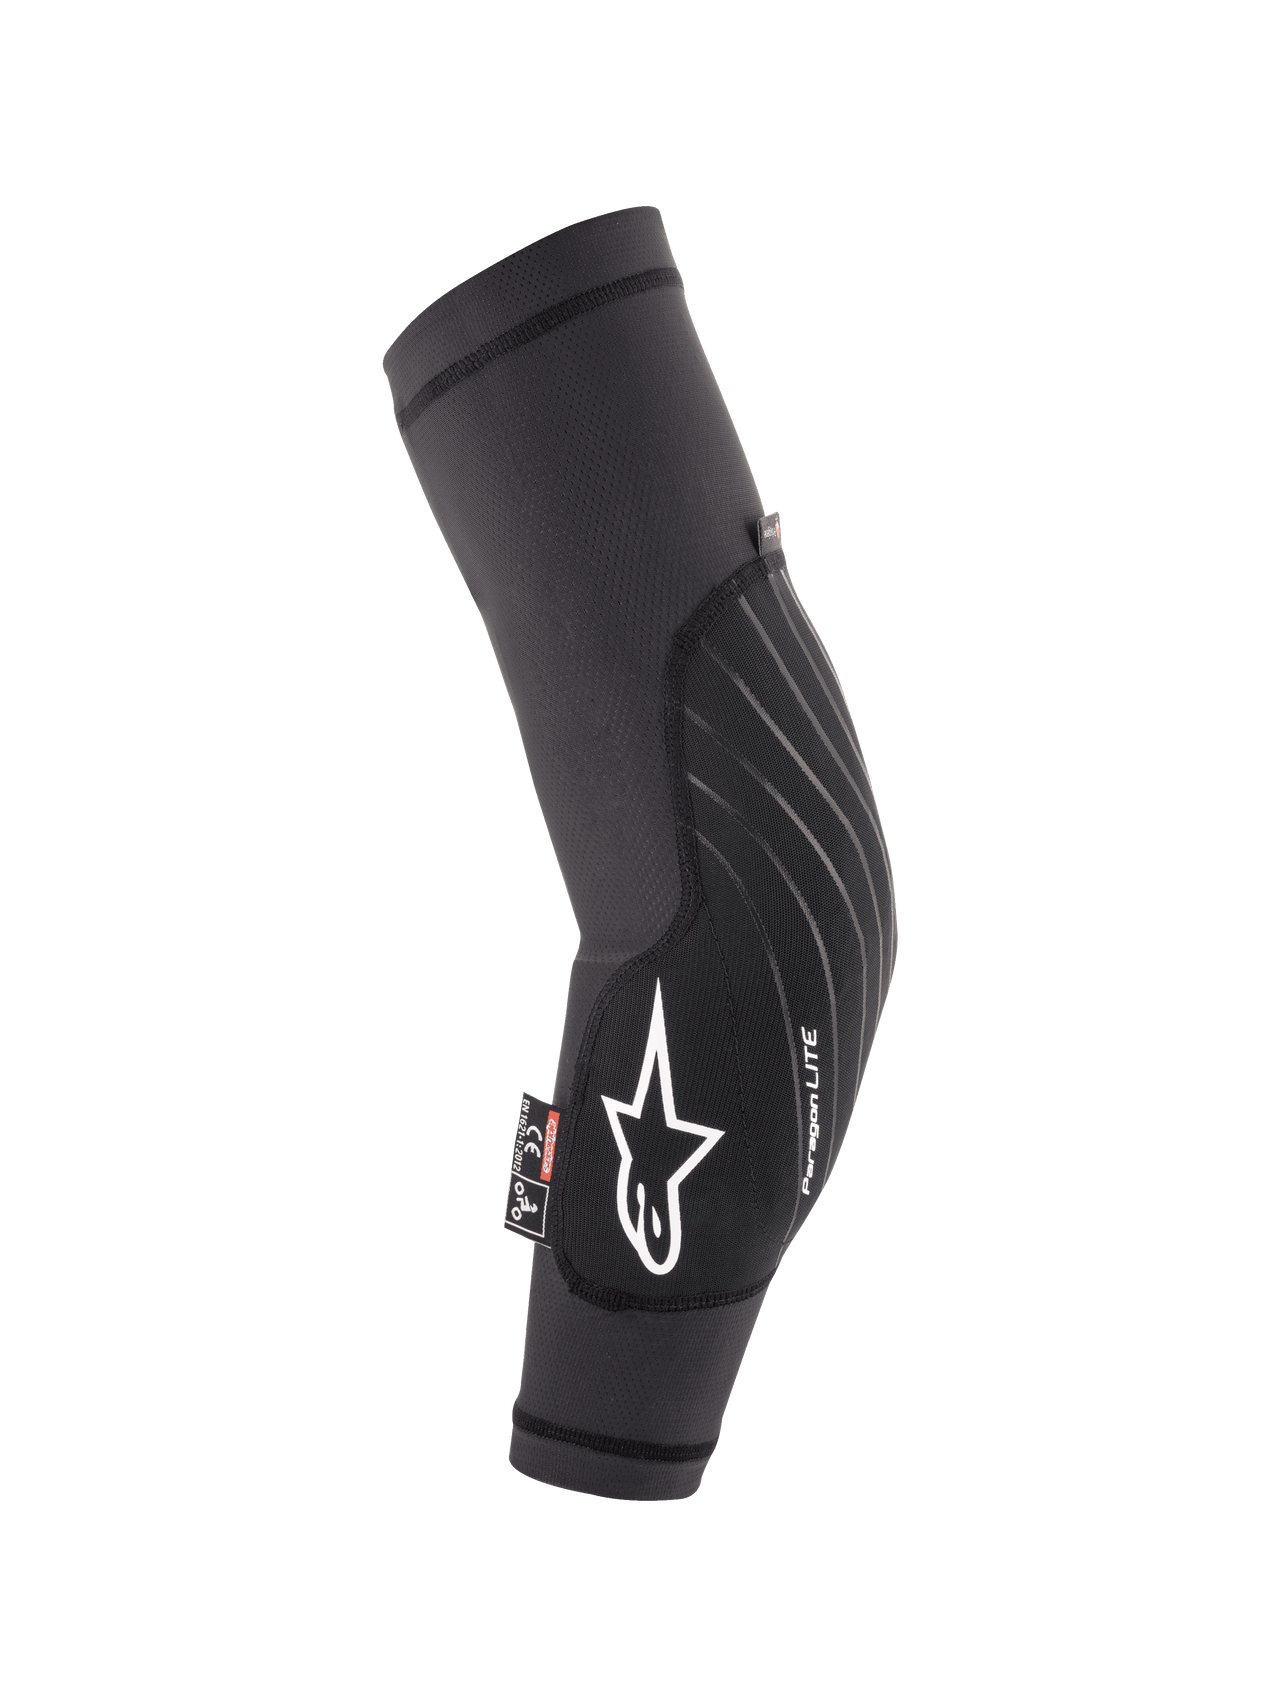 Youth Elbow Protection